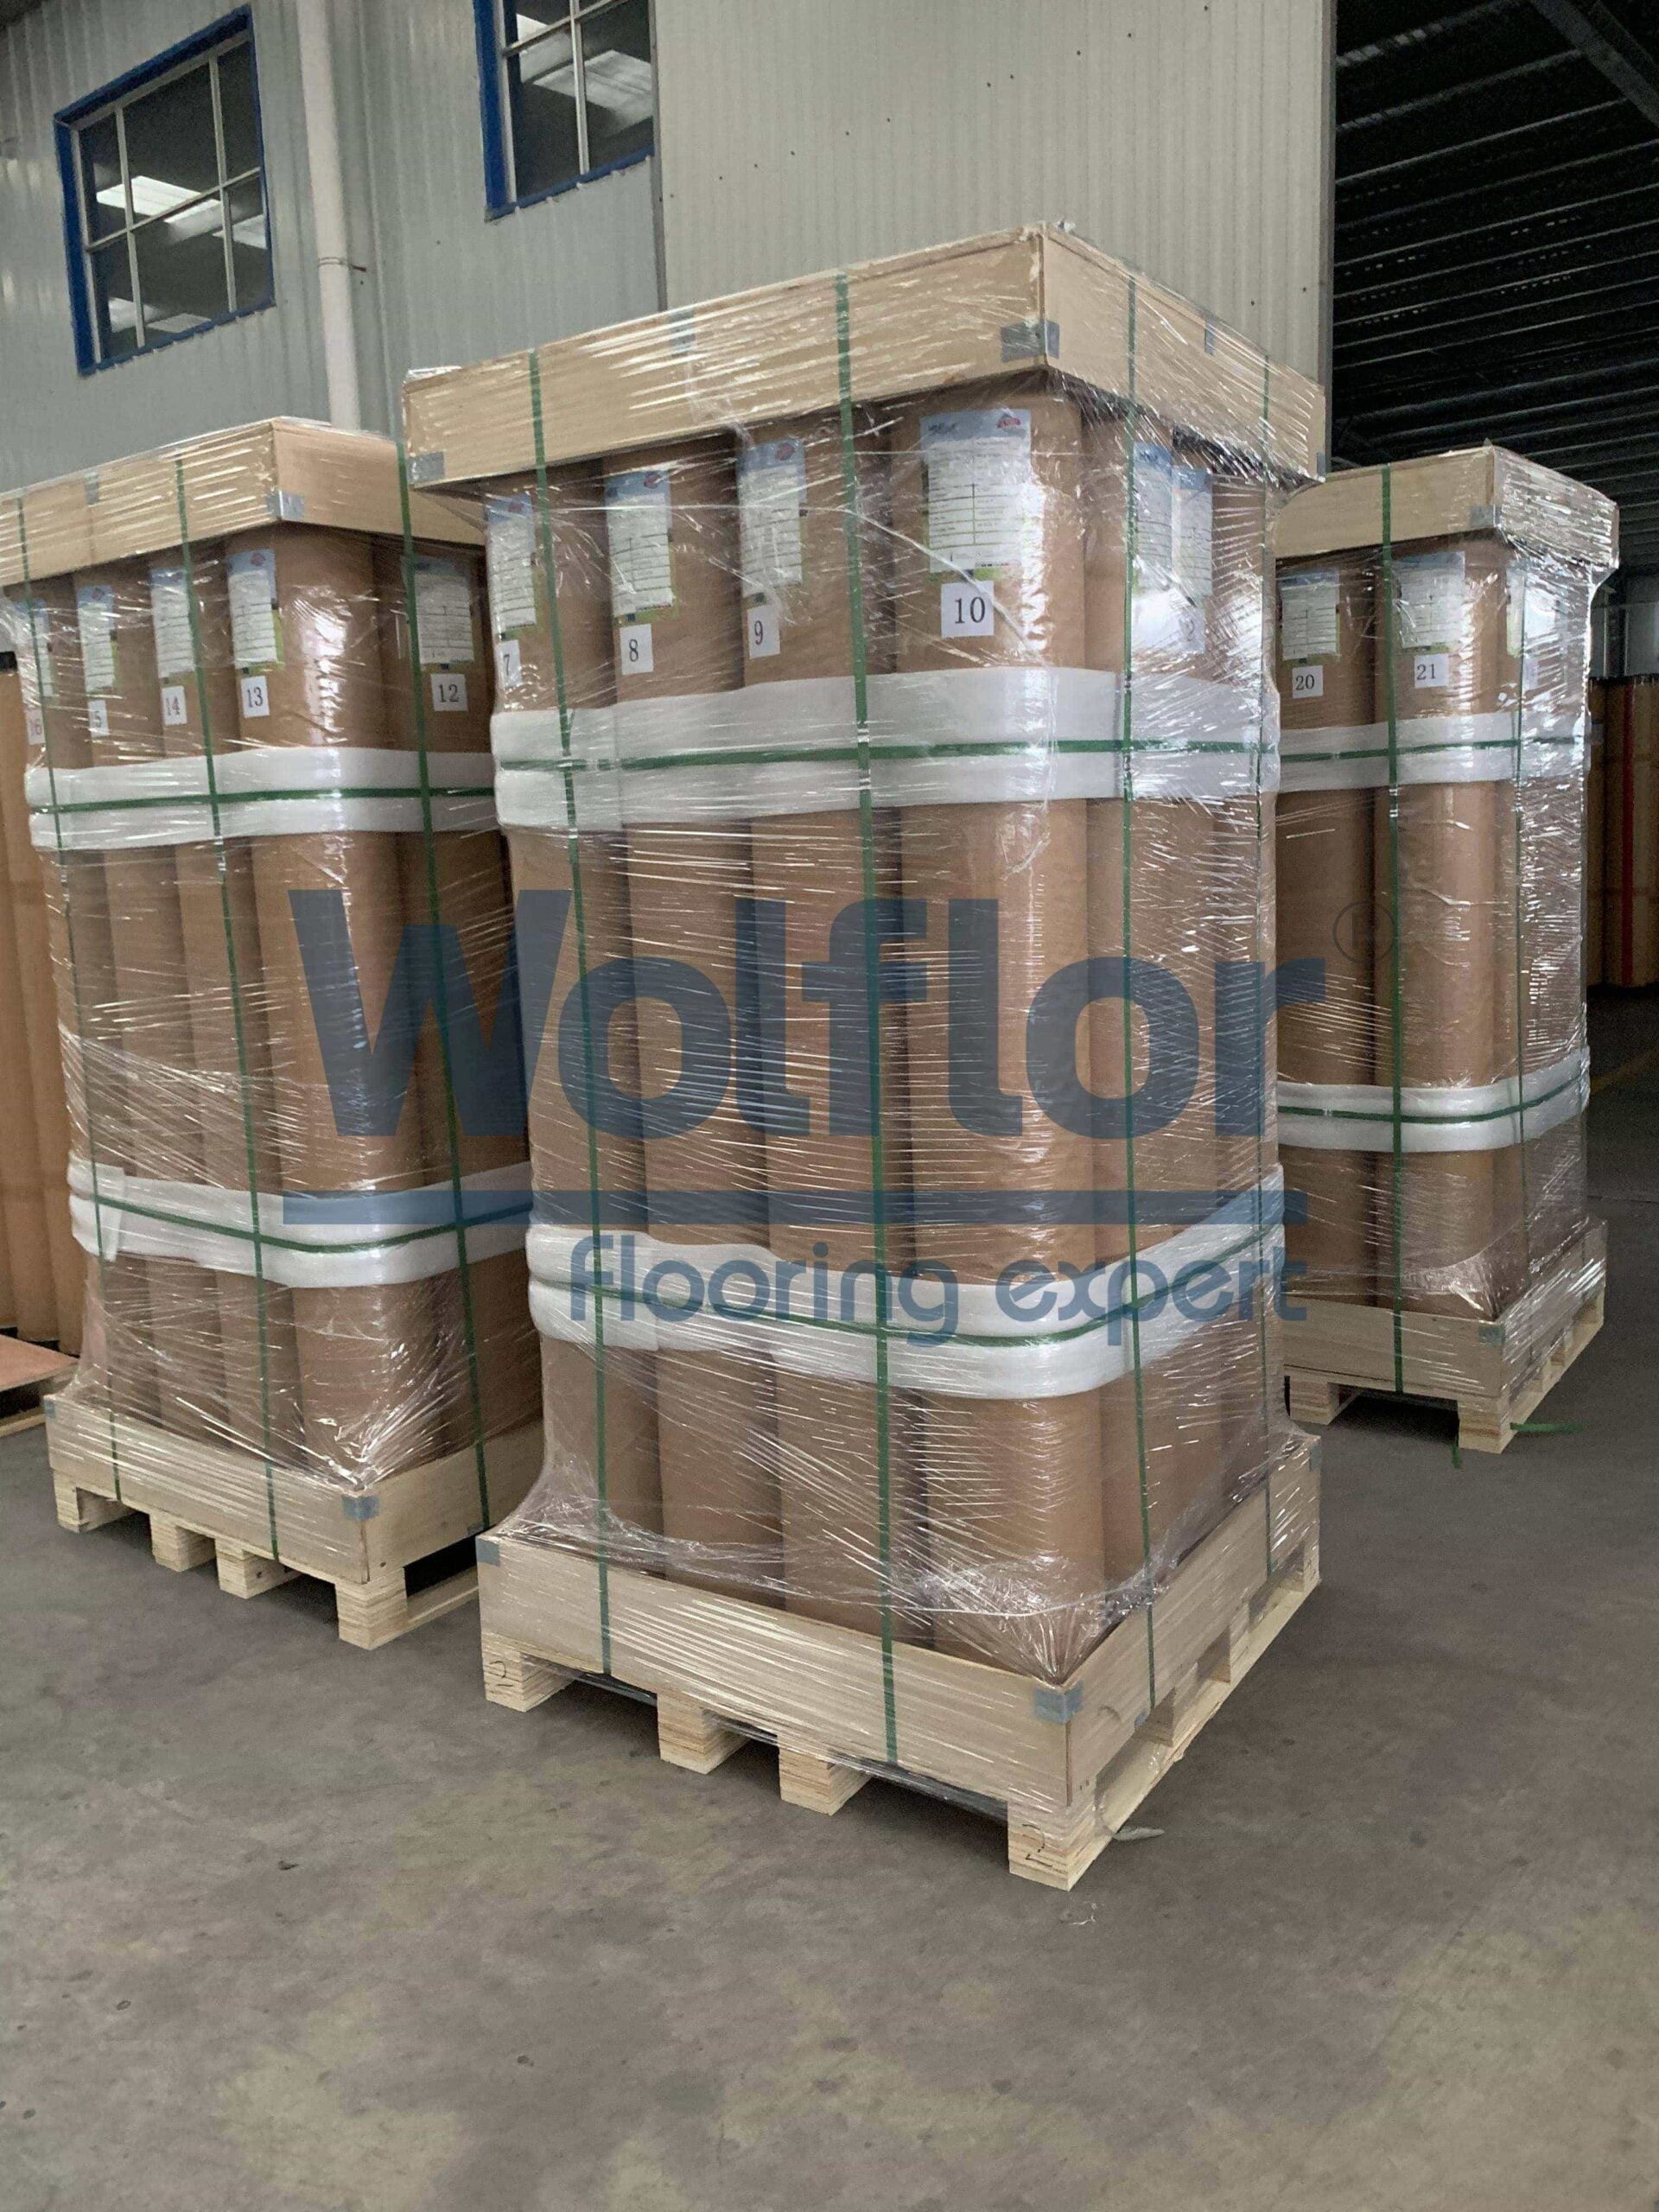 wolflor flooring package with pallets